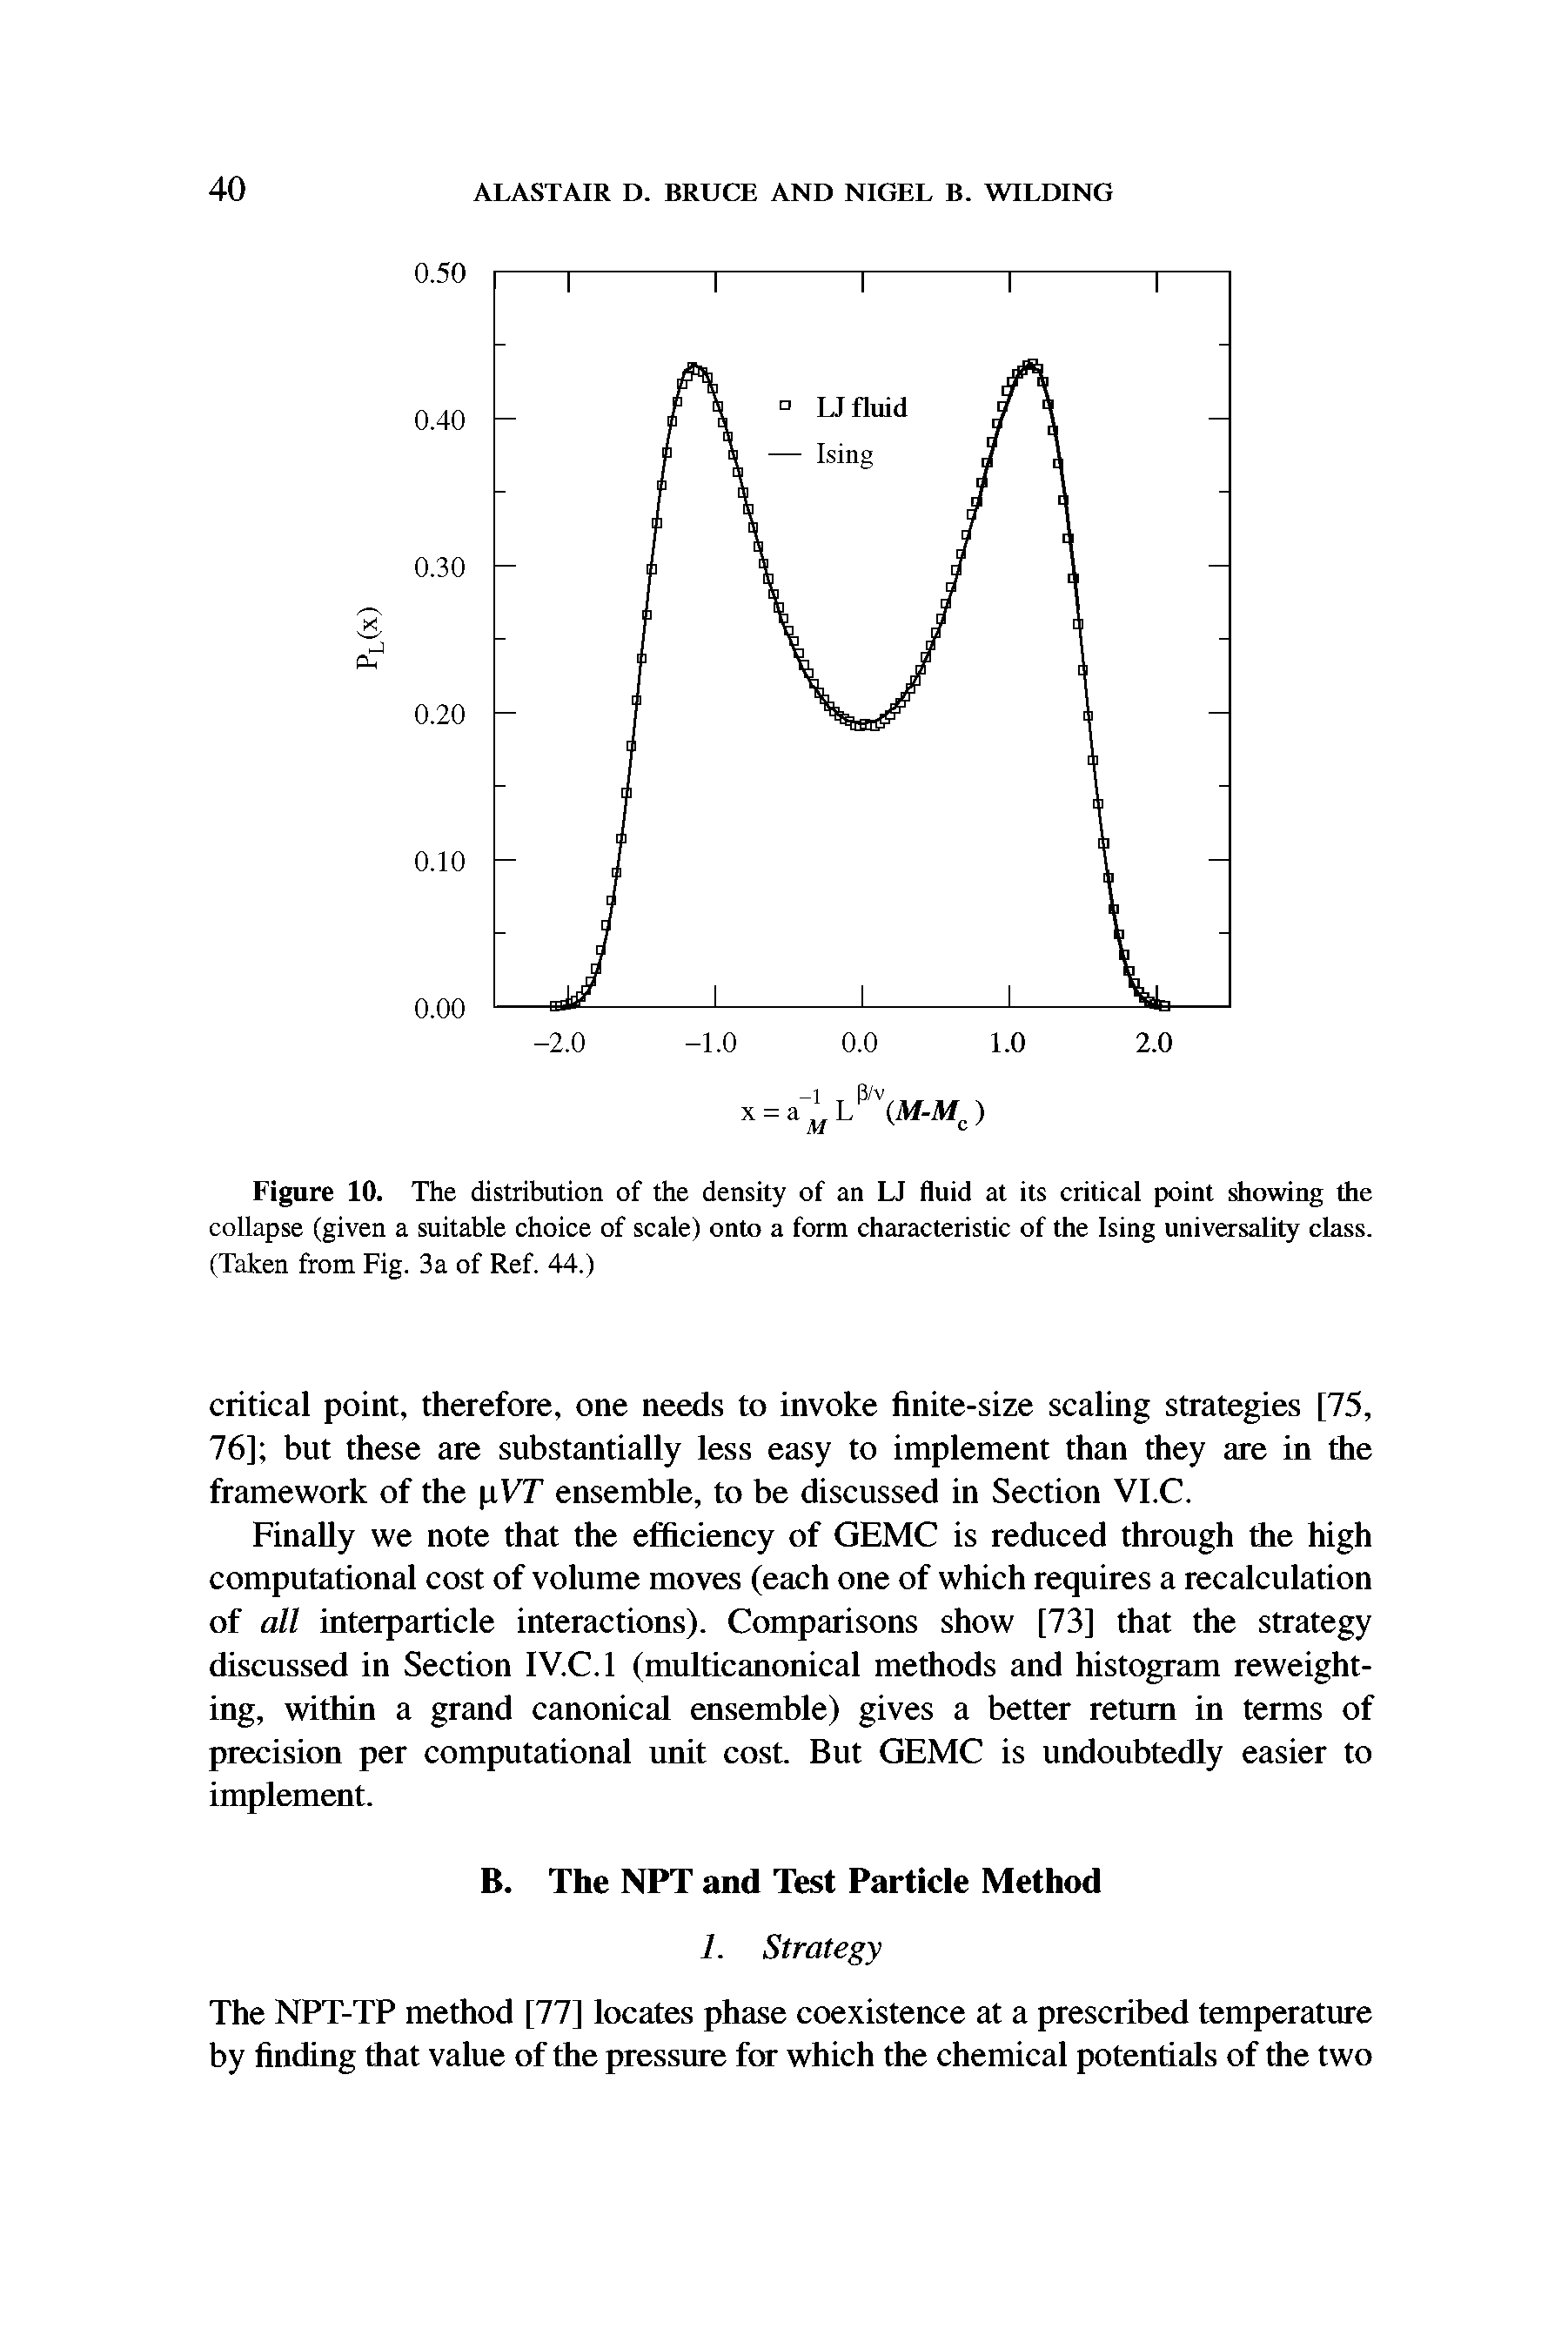 Figure 10. The distribution of the density of an LJ fluid at its critical point showing the collapse (given a suitable choice of scale) onto a form characteristic of the Ising universality class. (Taken from Fig. 3a of Ref. 44.)...